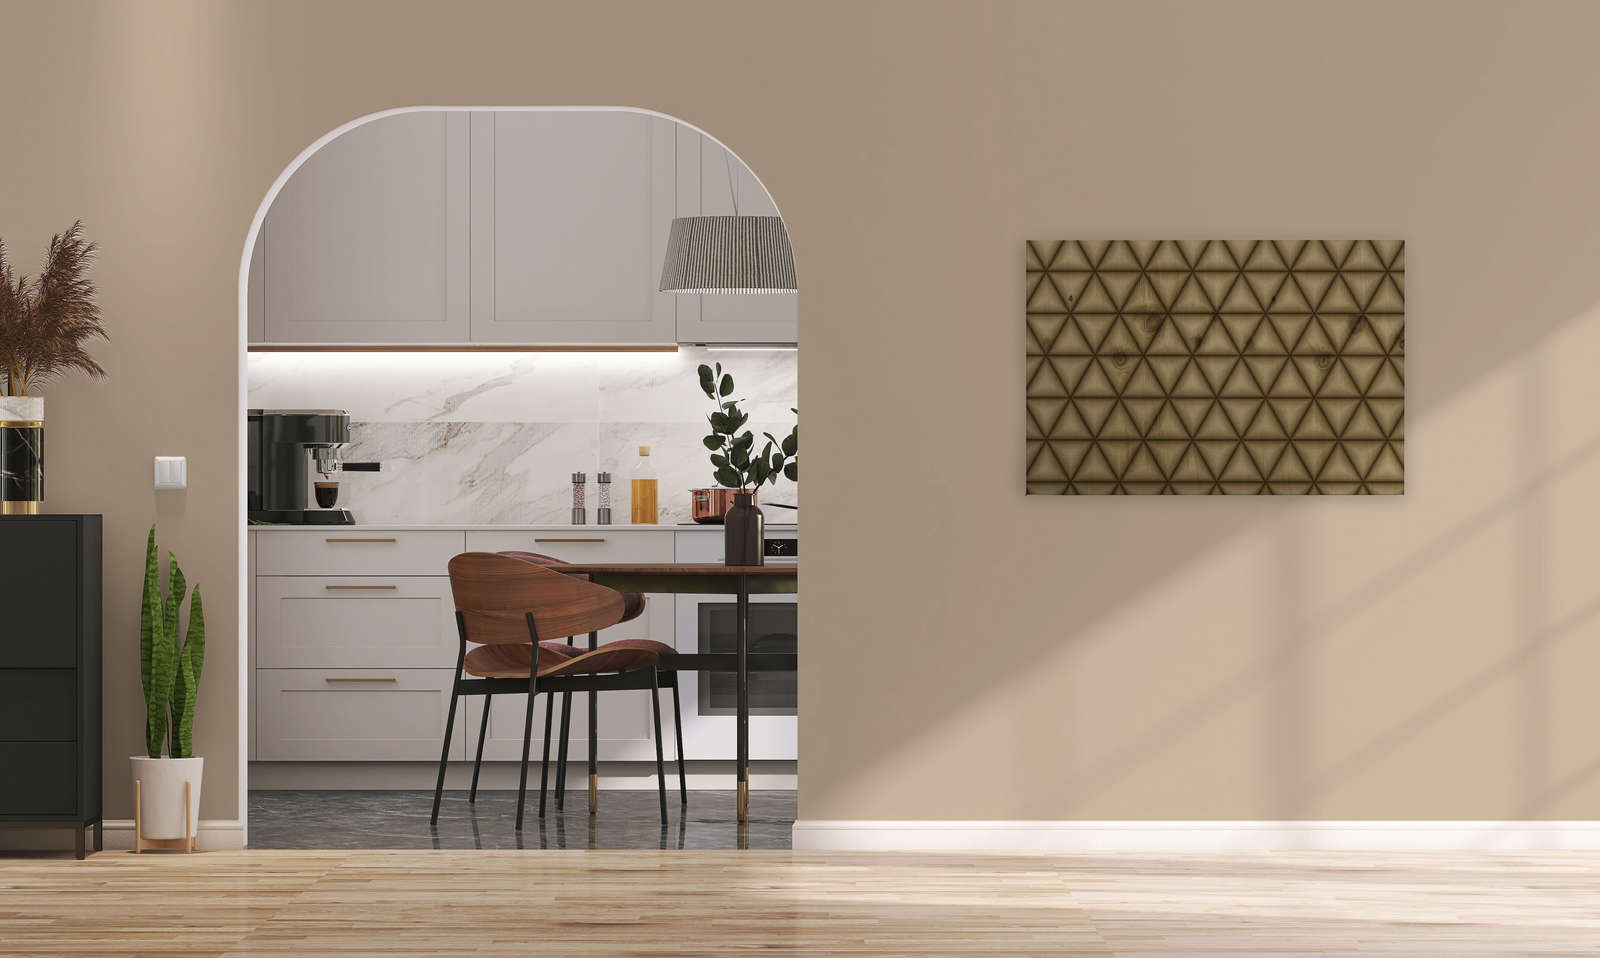             Canvas painting geometric triangle pattern in wood look | brown, beige - 0,90 m x 0,60 m
        